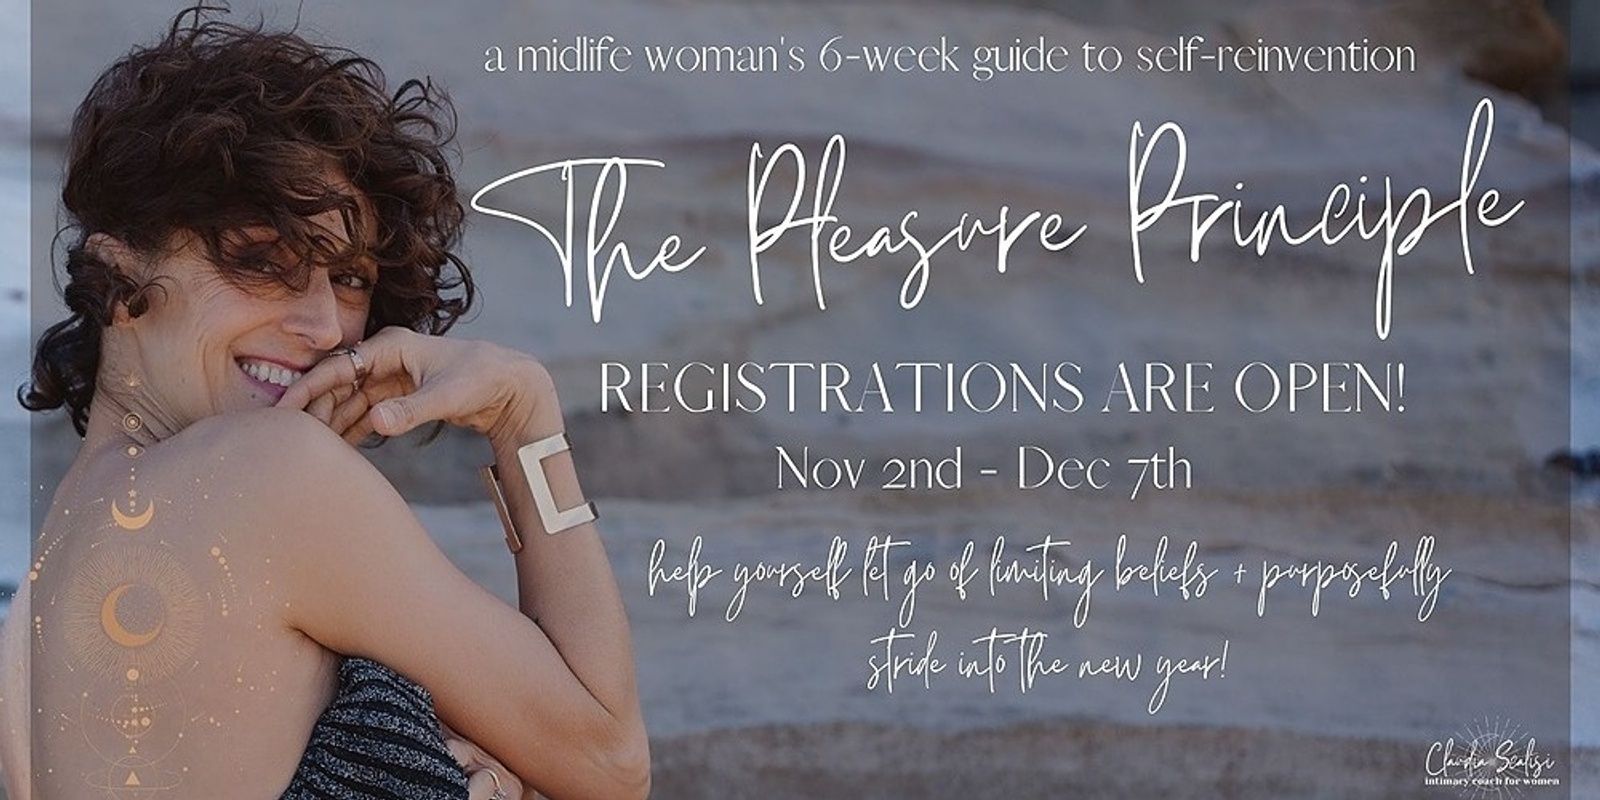 Banner image for The Pleasure Principle | a midlife woman's 6-week guide to self-reinvention through peri-menopause 